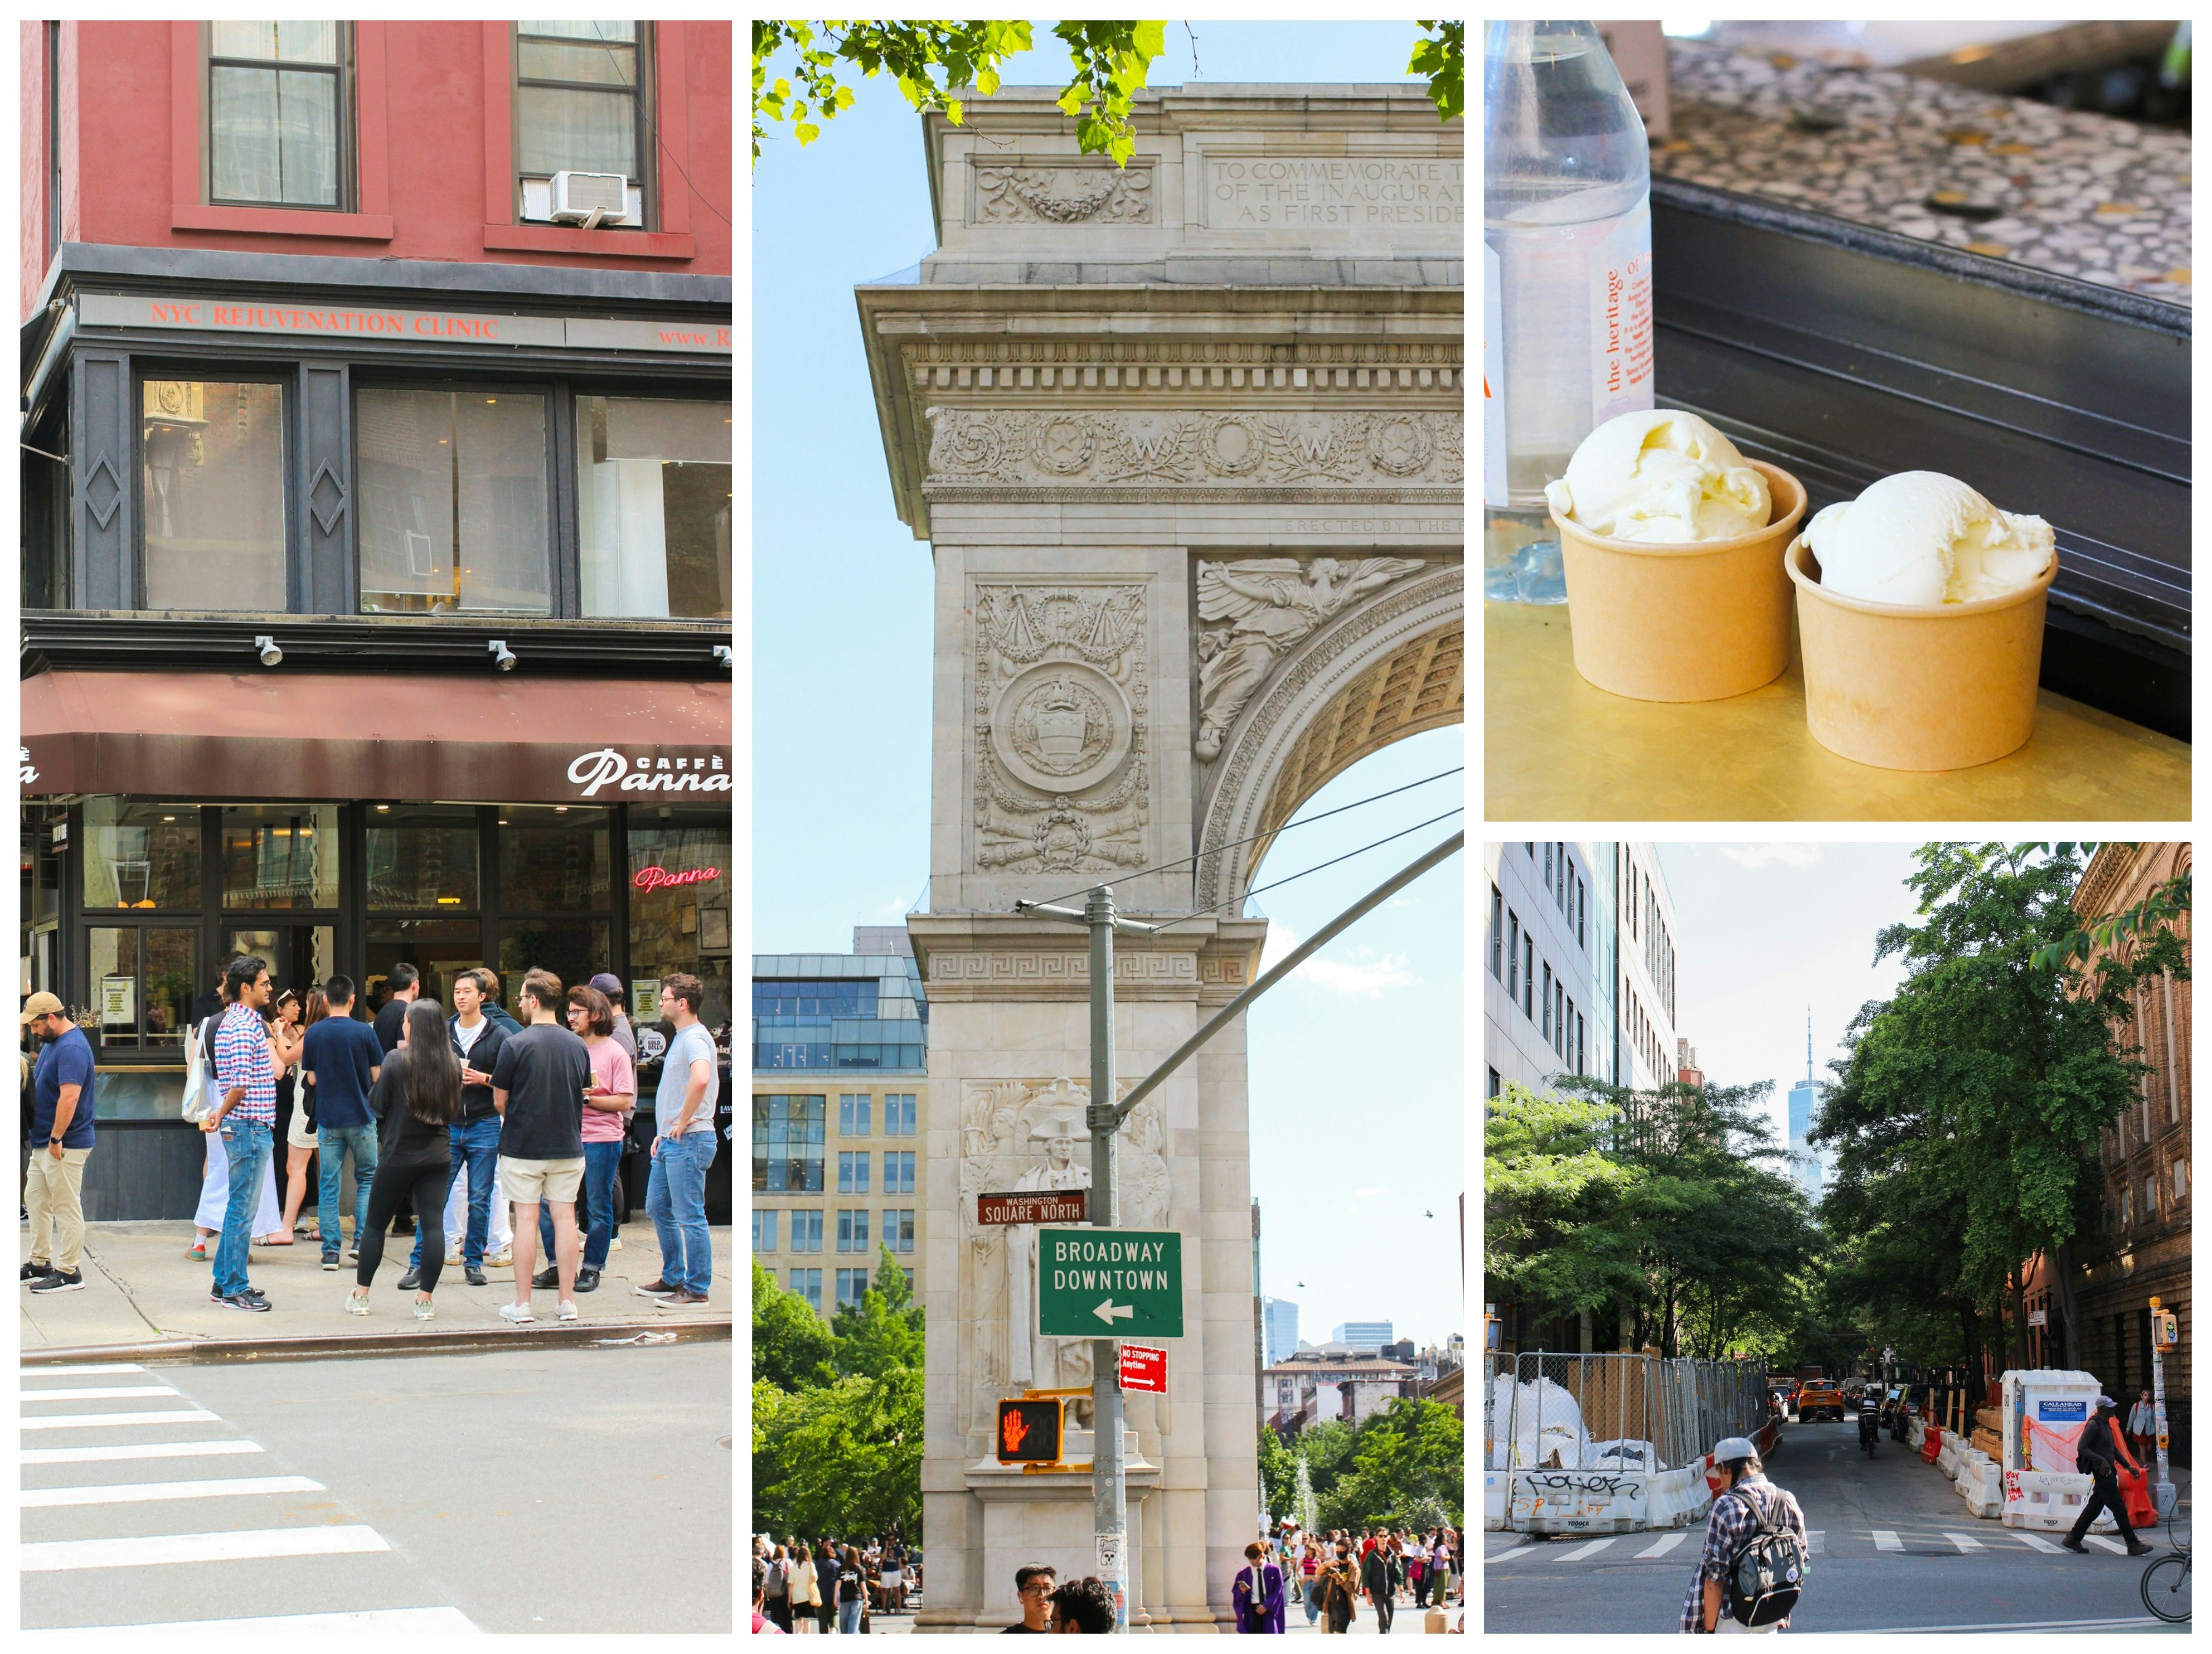 Collage; Left: Customers waiting for their ice cream outside Caffe Panna, Middle: The Washington Square Park arch, Top right: Two ice creams from Caffe Panna, Bottom right: A view of One World Trade from Washington Square Park 